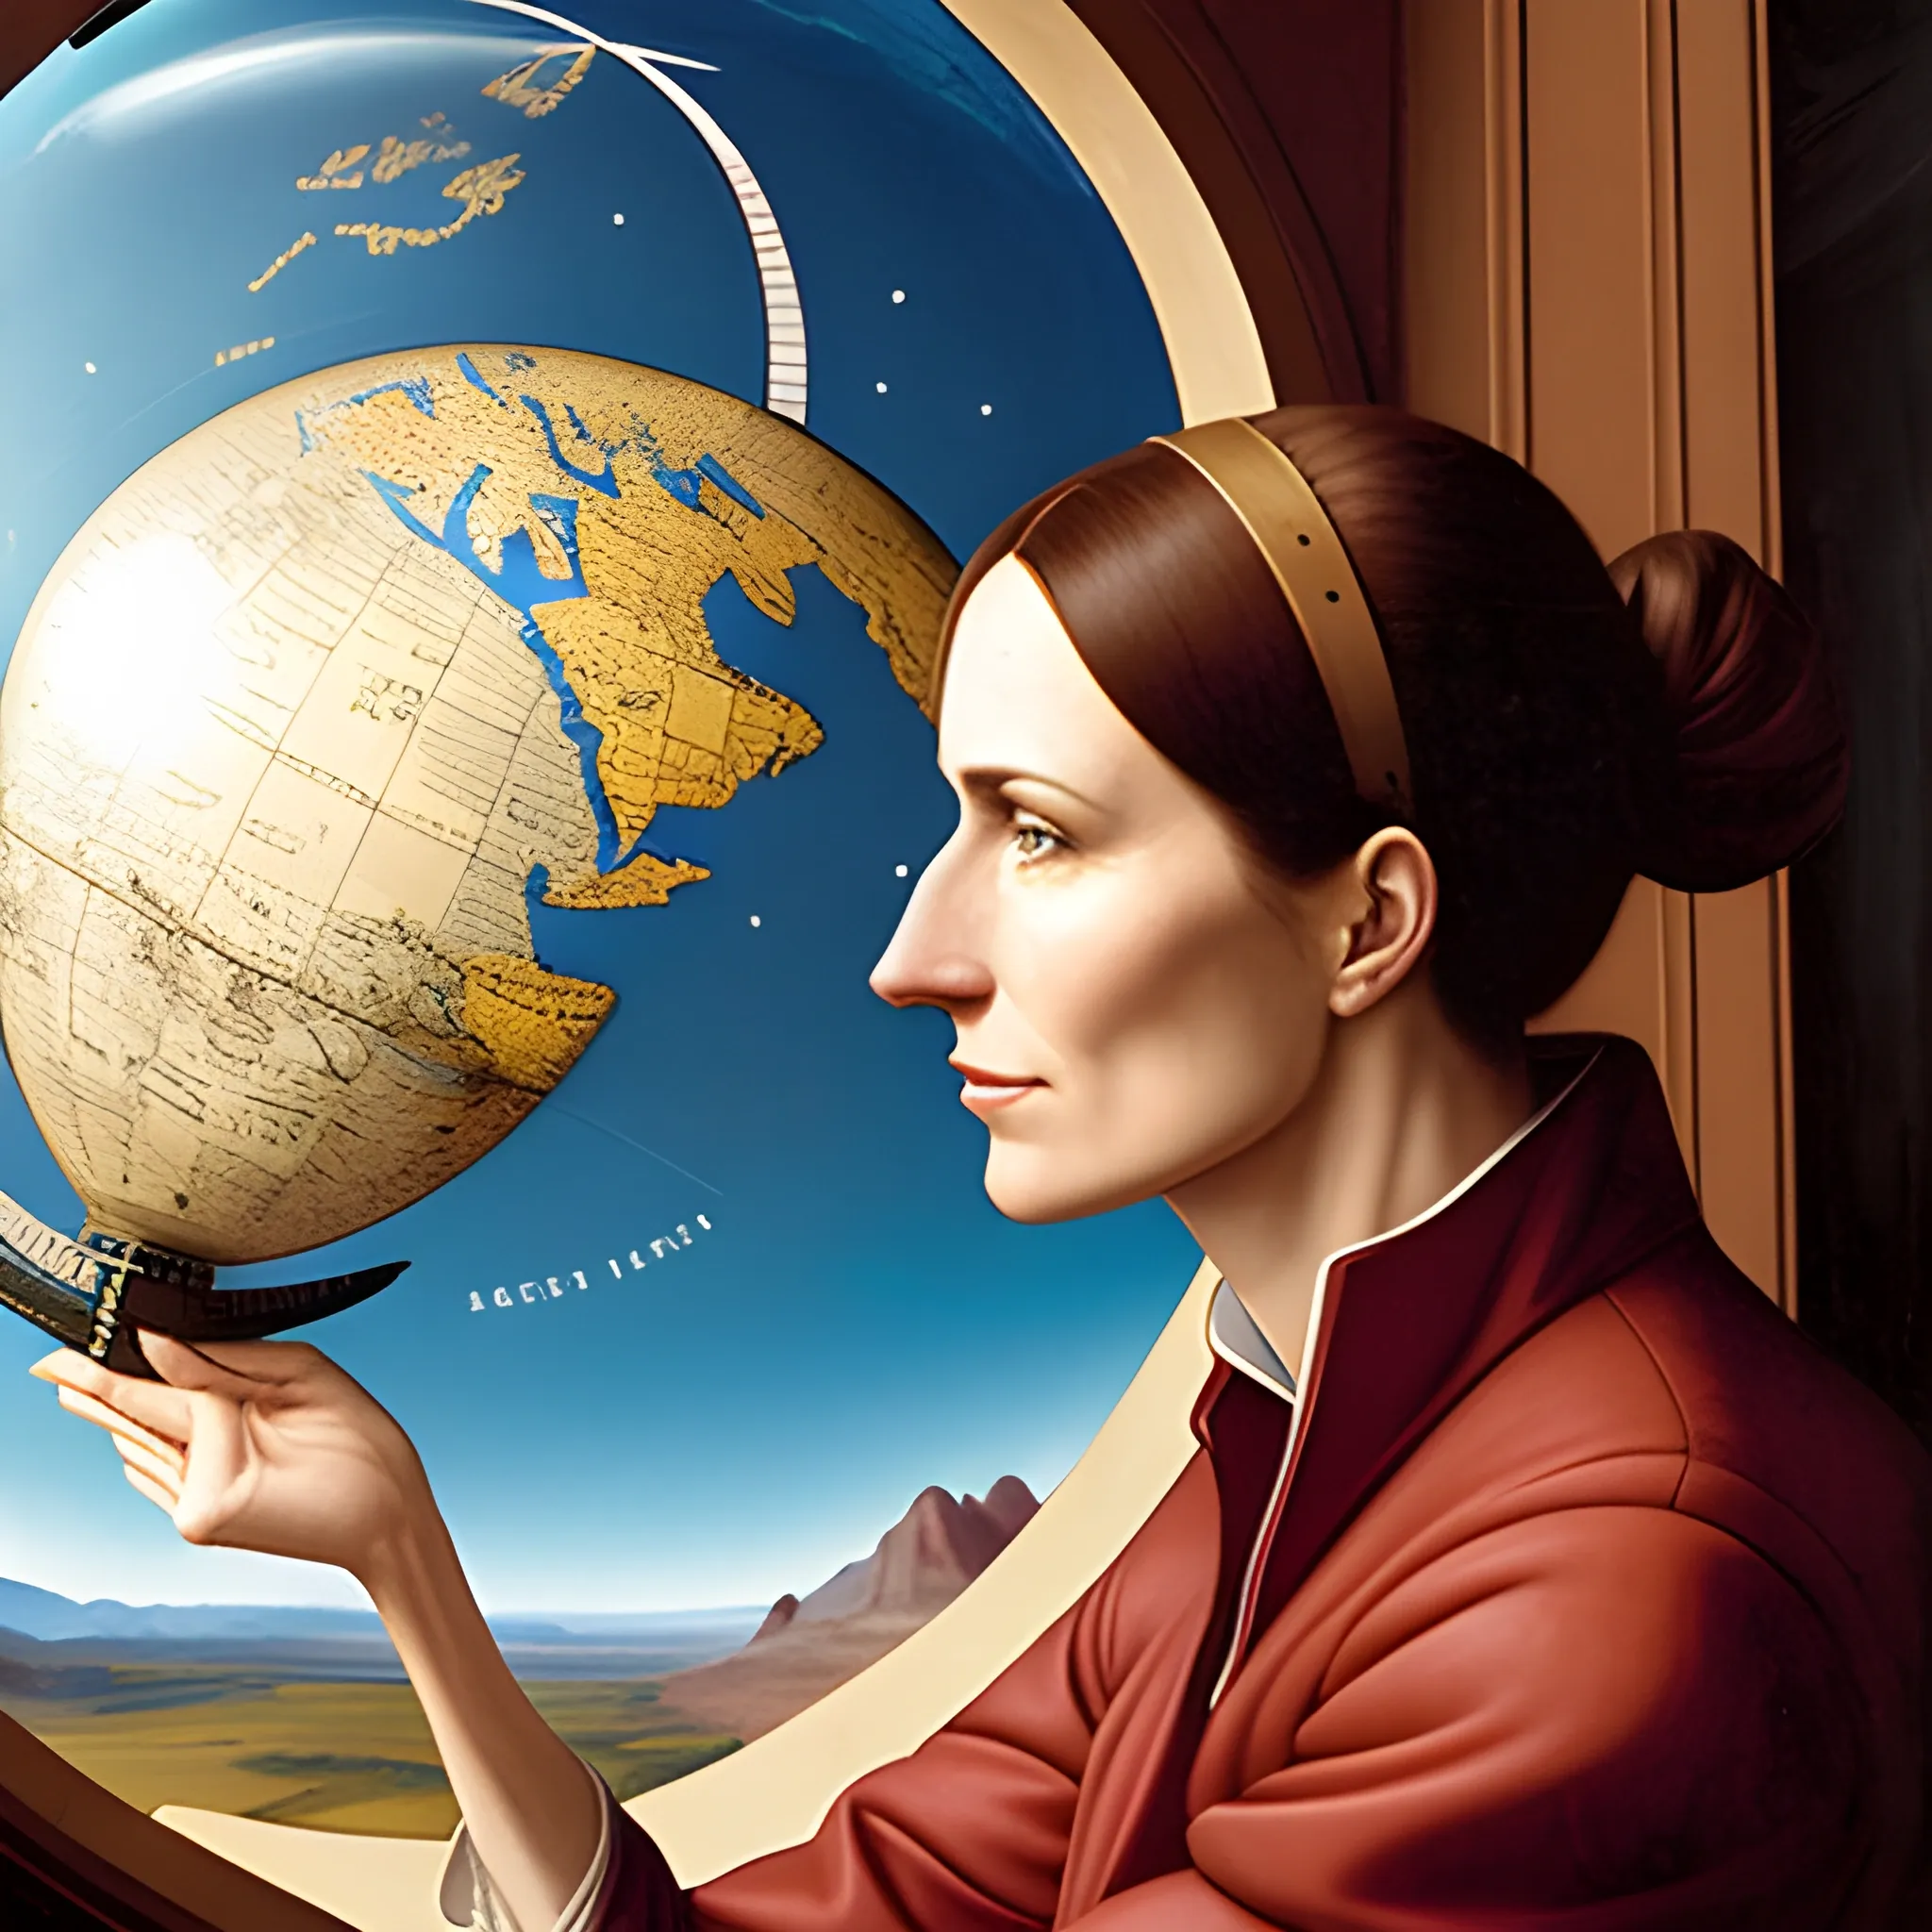 Create a portrait of a young female explorer standing by a window, leaning against a giant globe. Compasses, binoculars, magnifying glass and maps fly in the air, Renaissance by Michelangelo